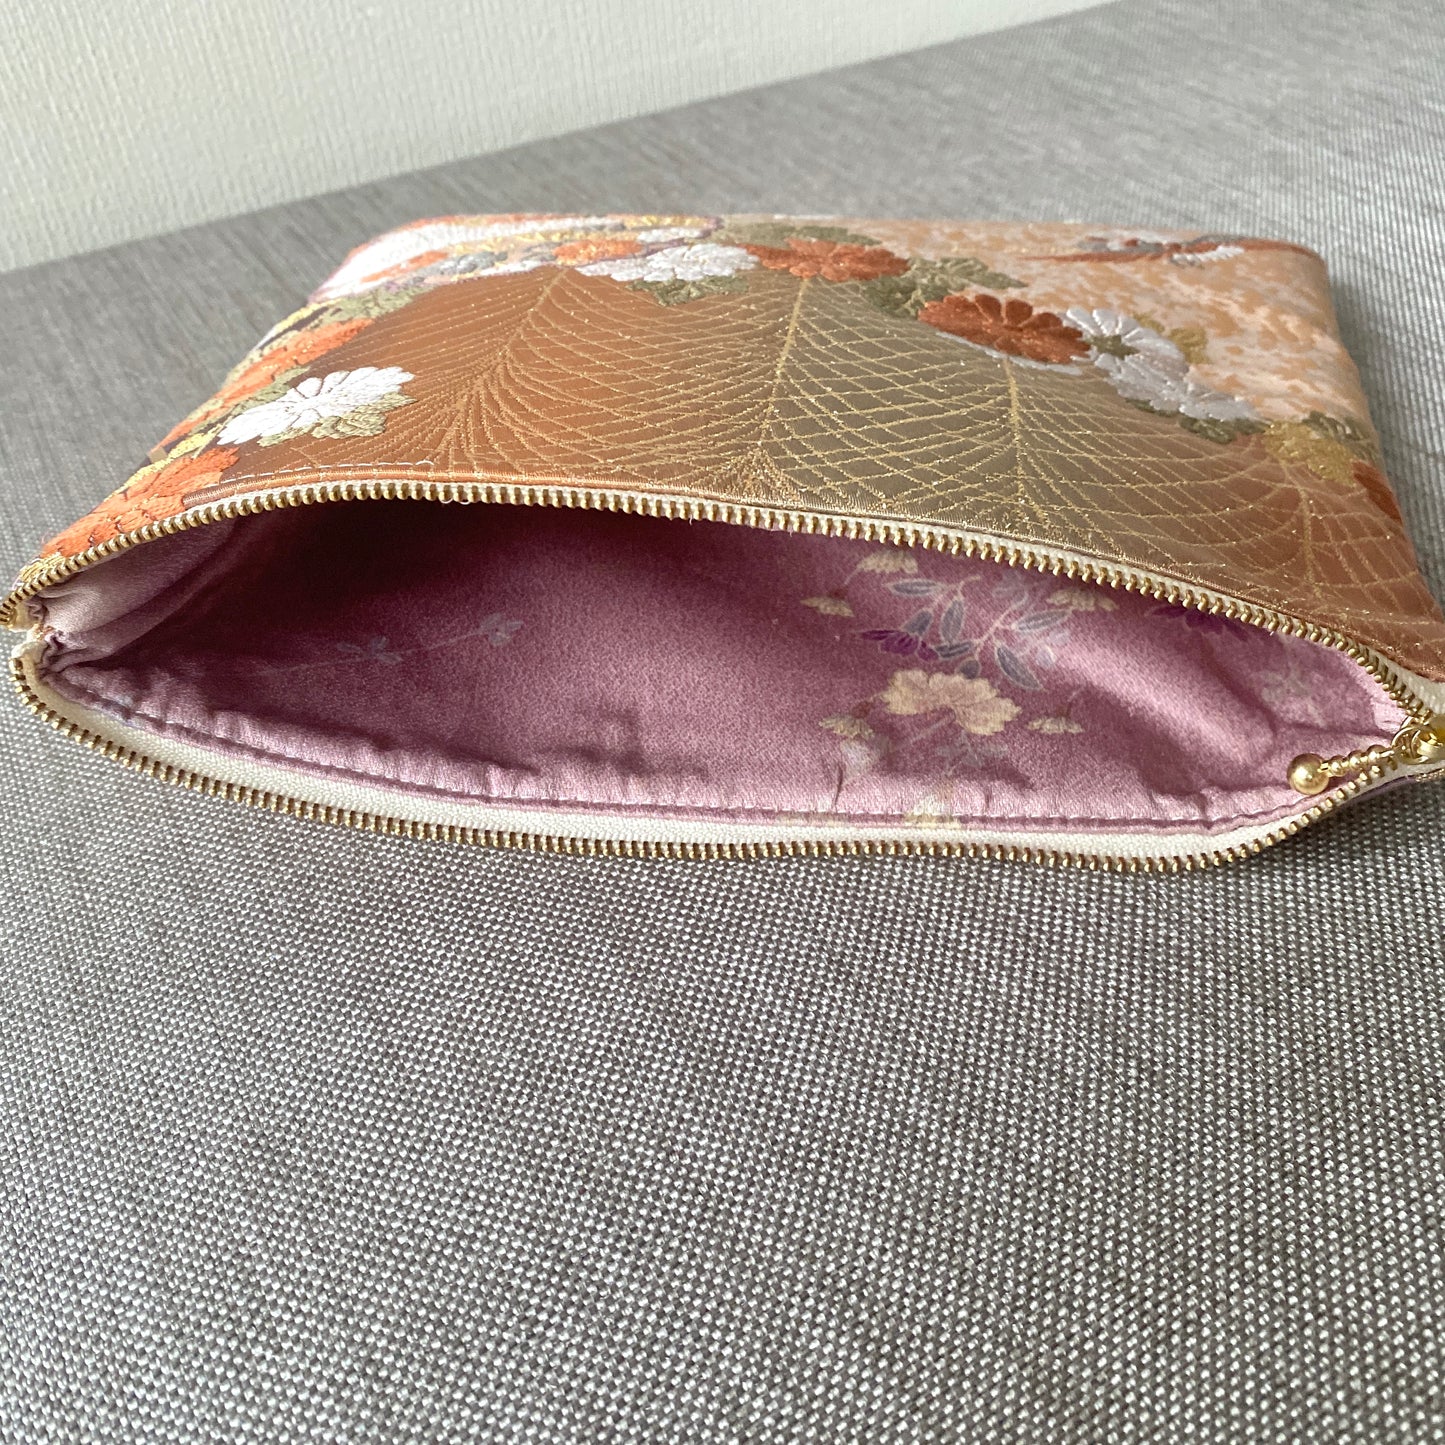 Flat silk Obi pouch, Medium size, Handcrafted, Upcycled